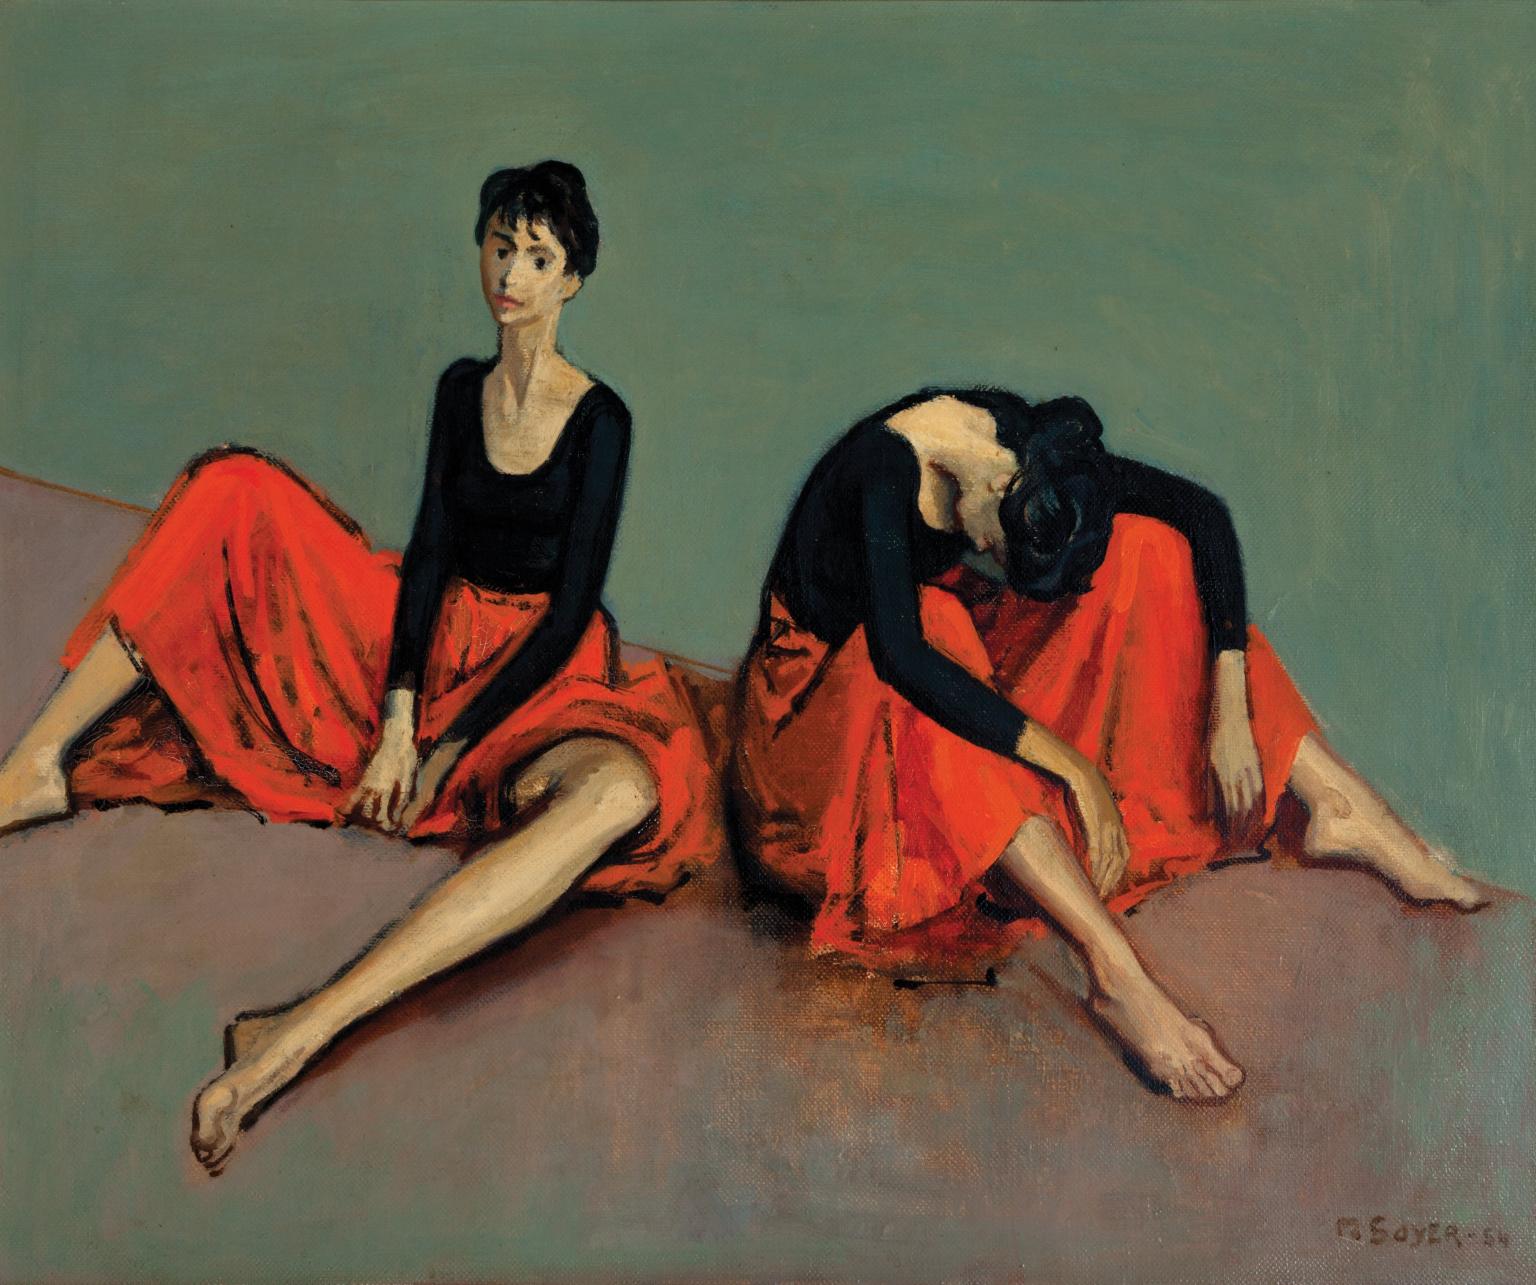 Painting of two female dancers in skirts seated with their knees slightly bent facing the viewer, one with head dropped and the other sitting up.